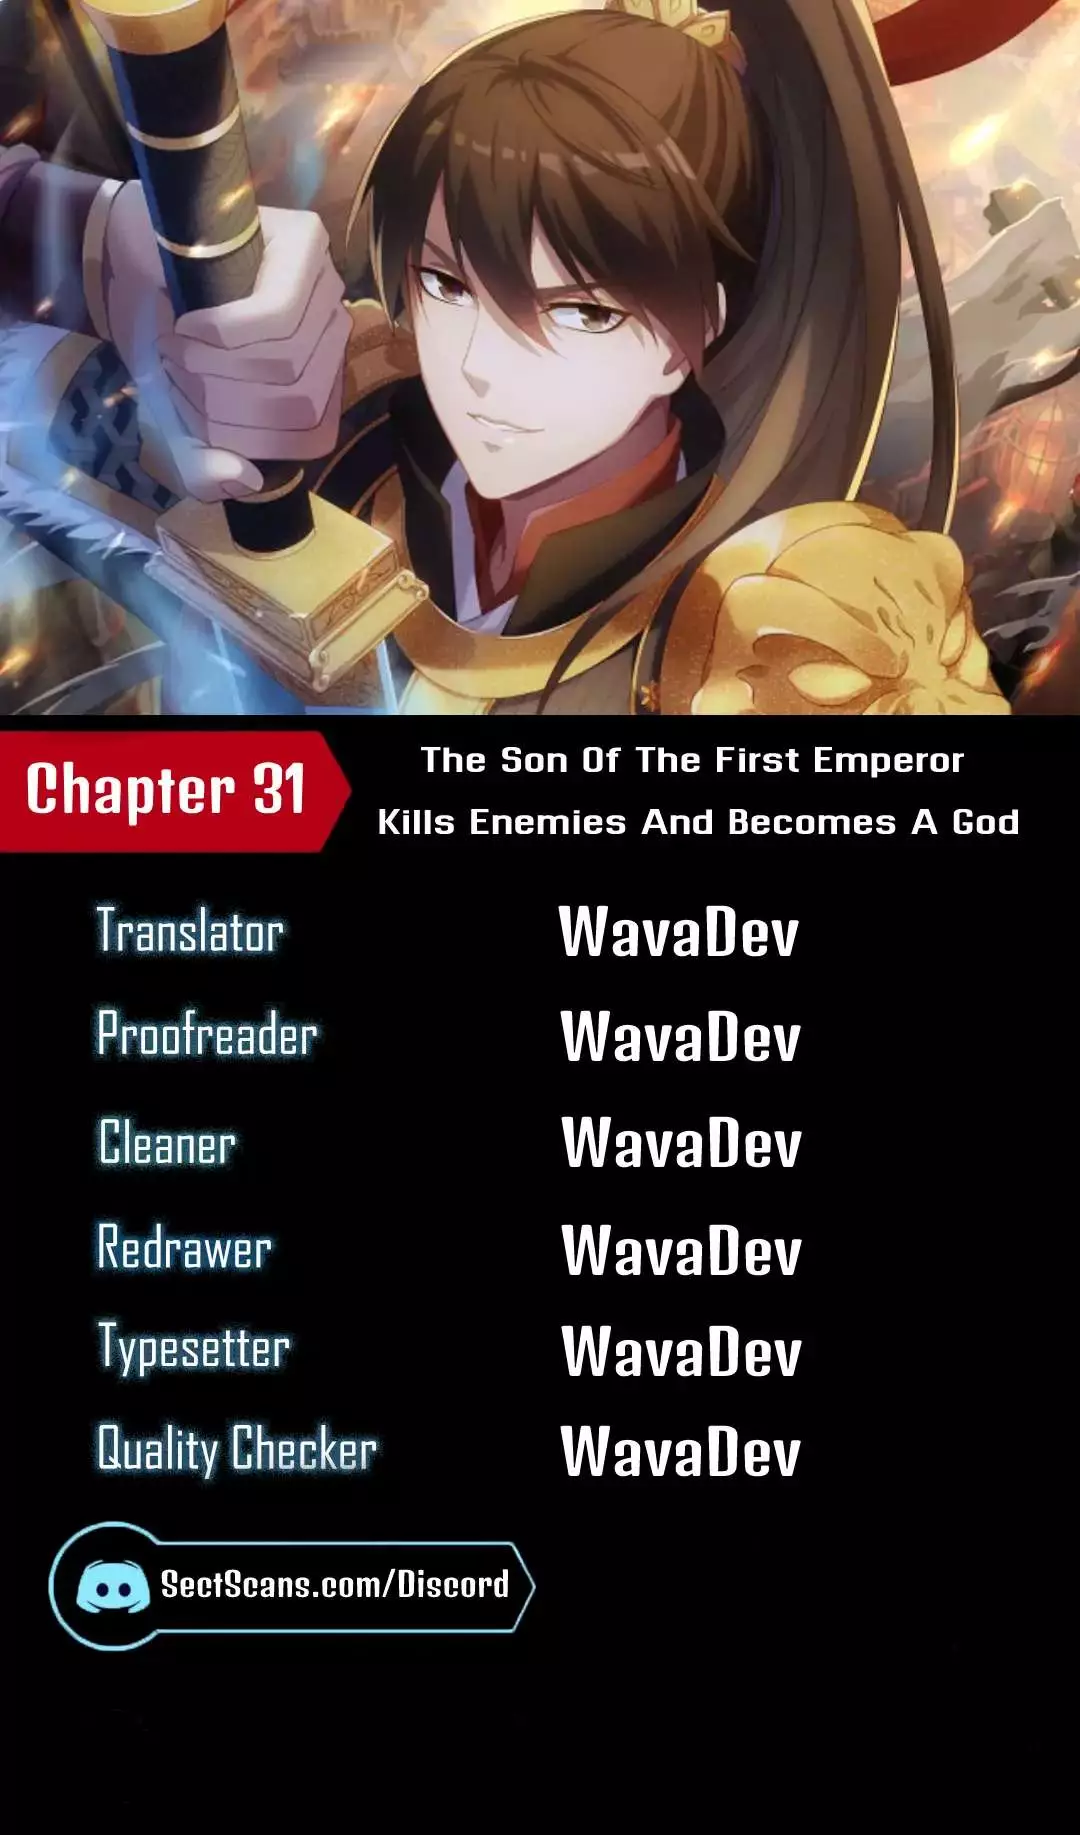 The Son Of The First Emperor Kills Enemies And Becomes A God - 31 page 1-69cd8d2b